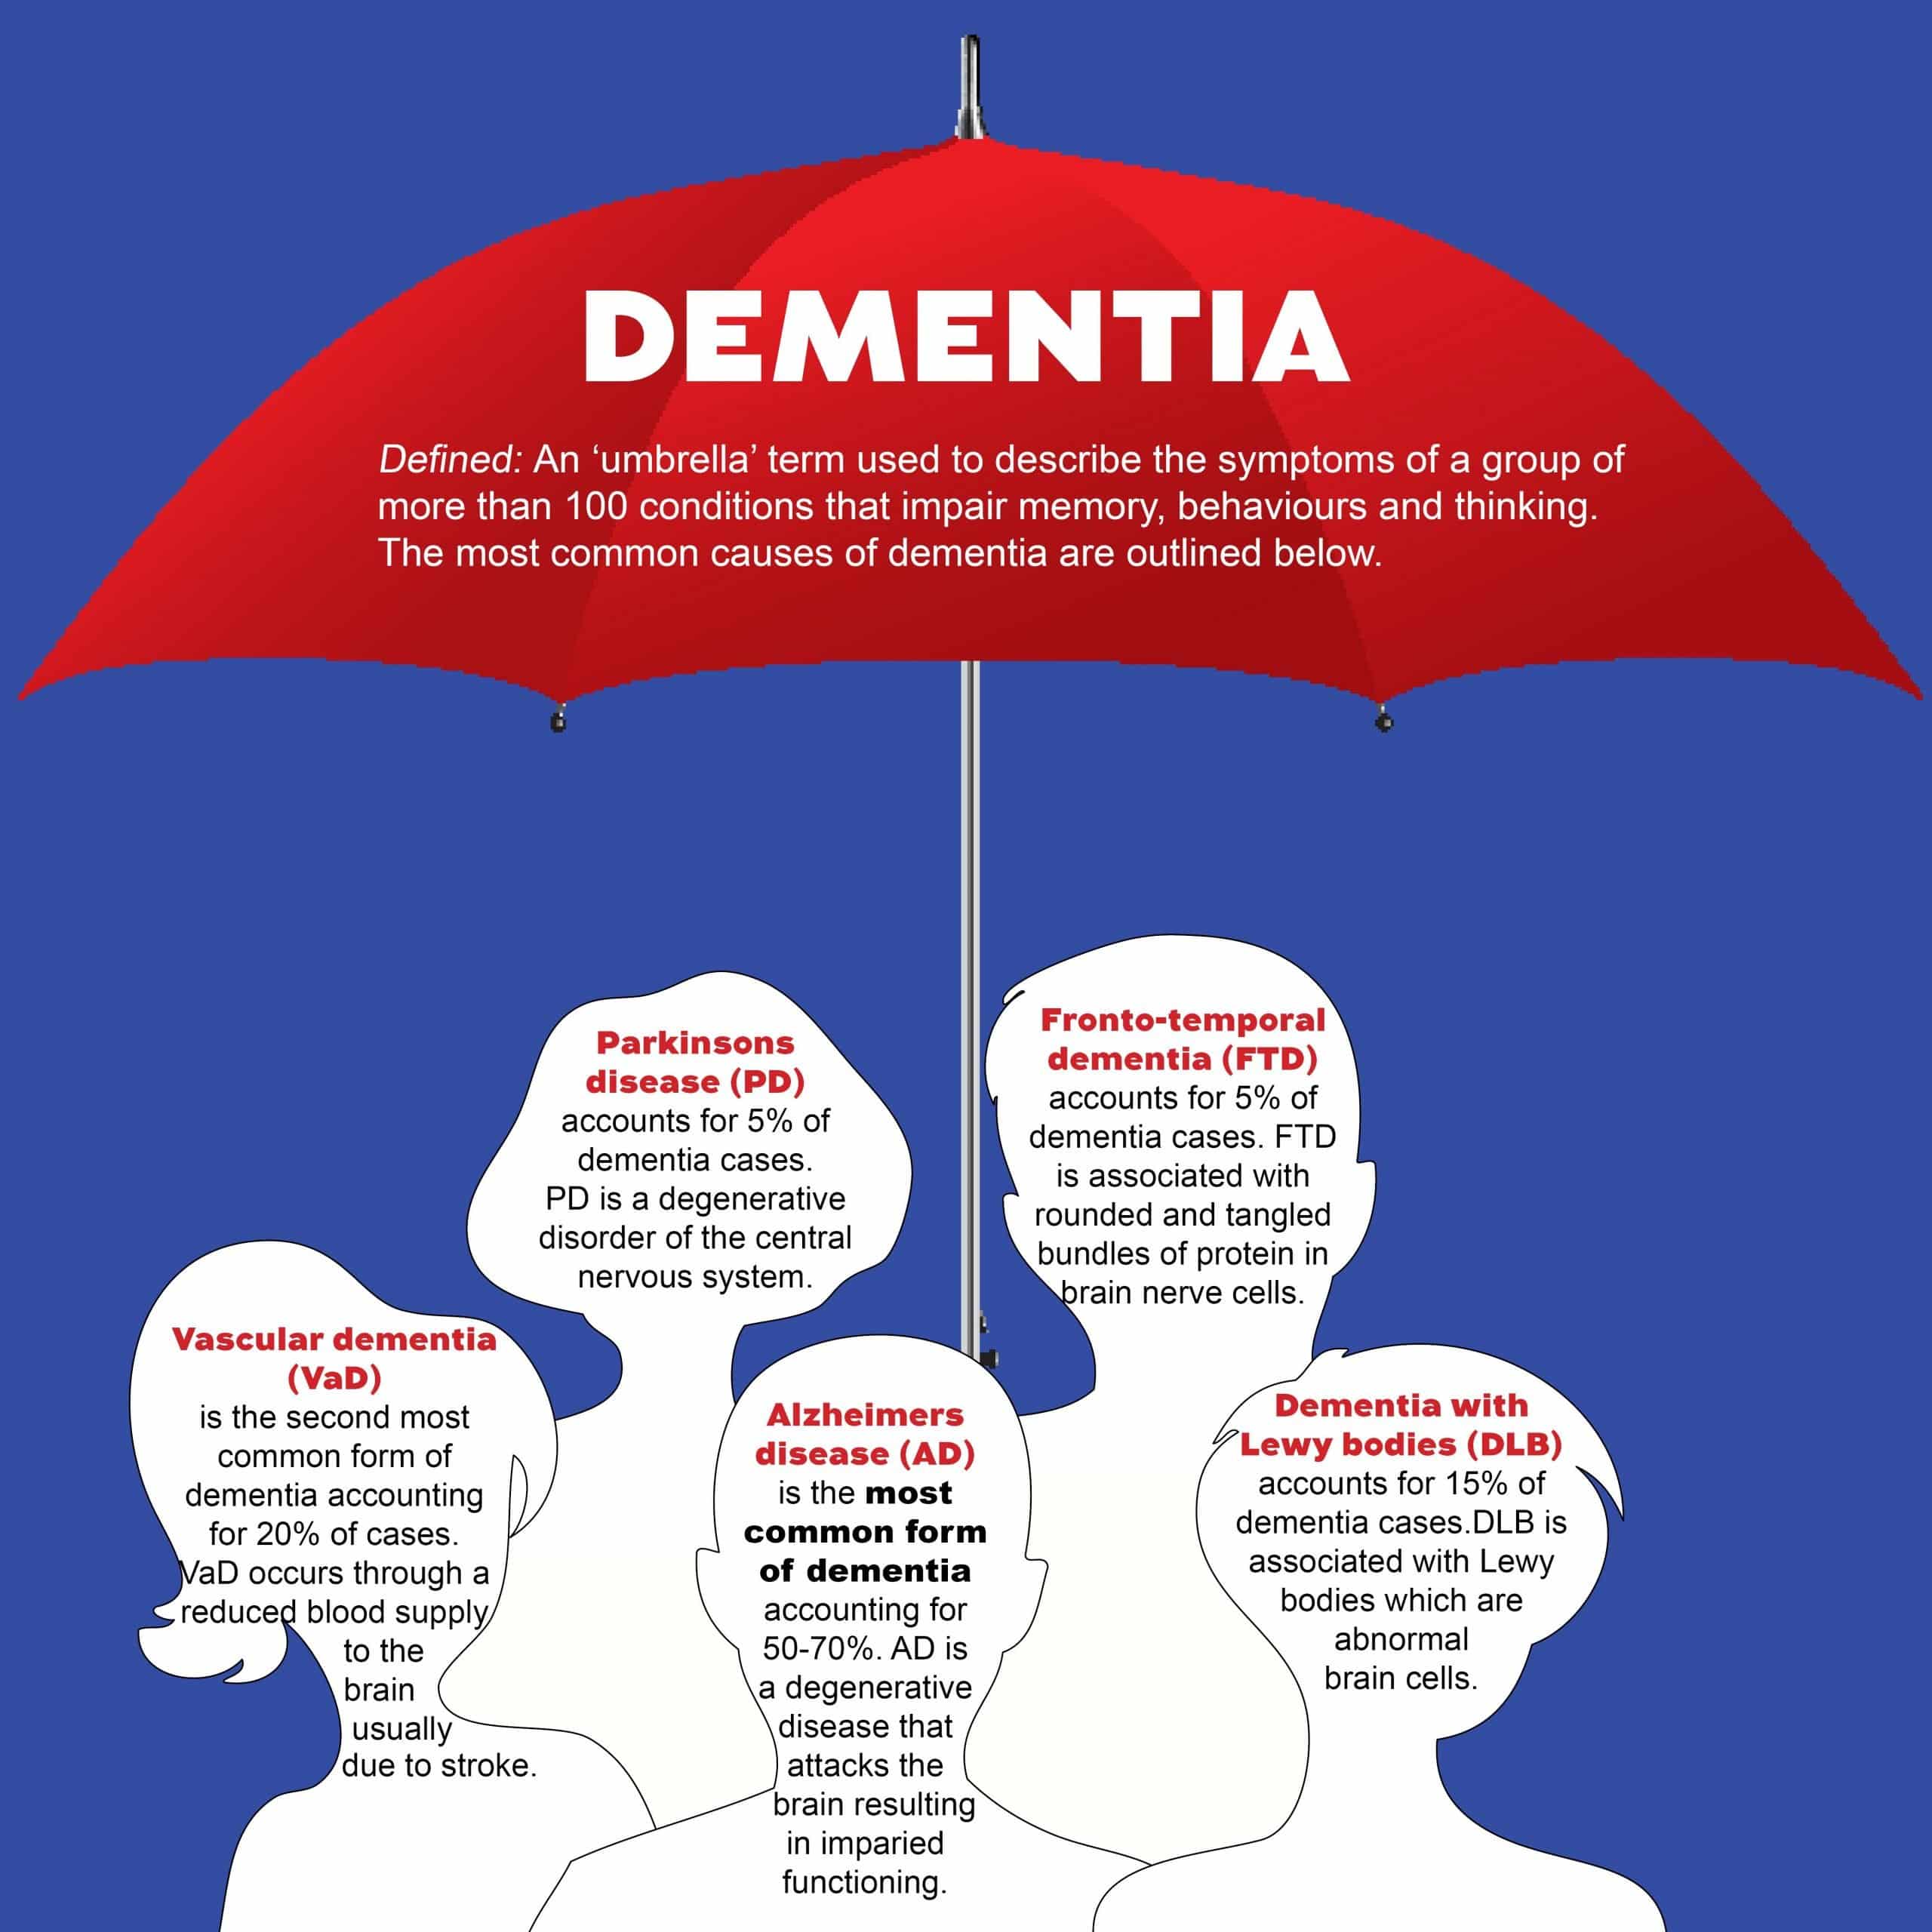 Is Alzheimers The Most Common Form Of Dementia